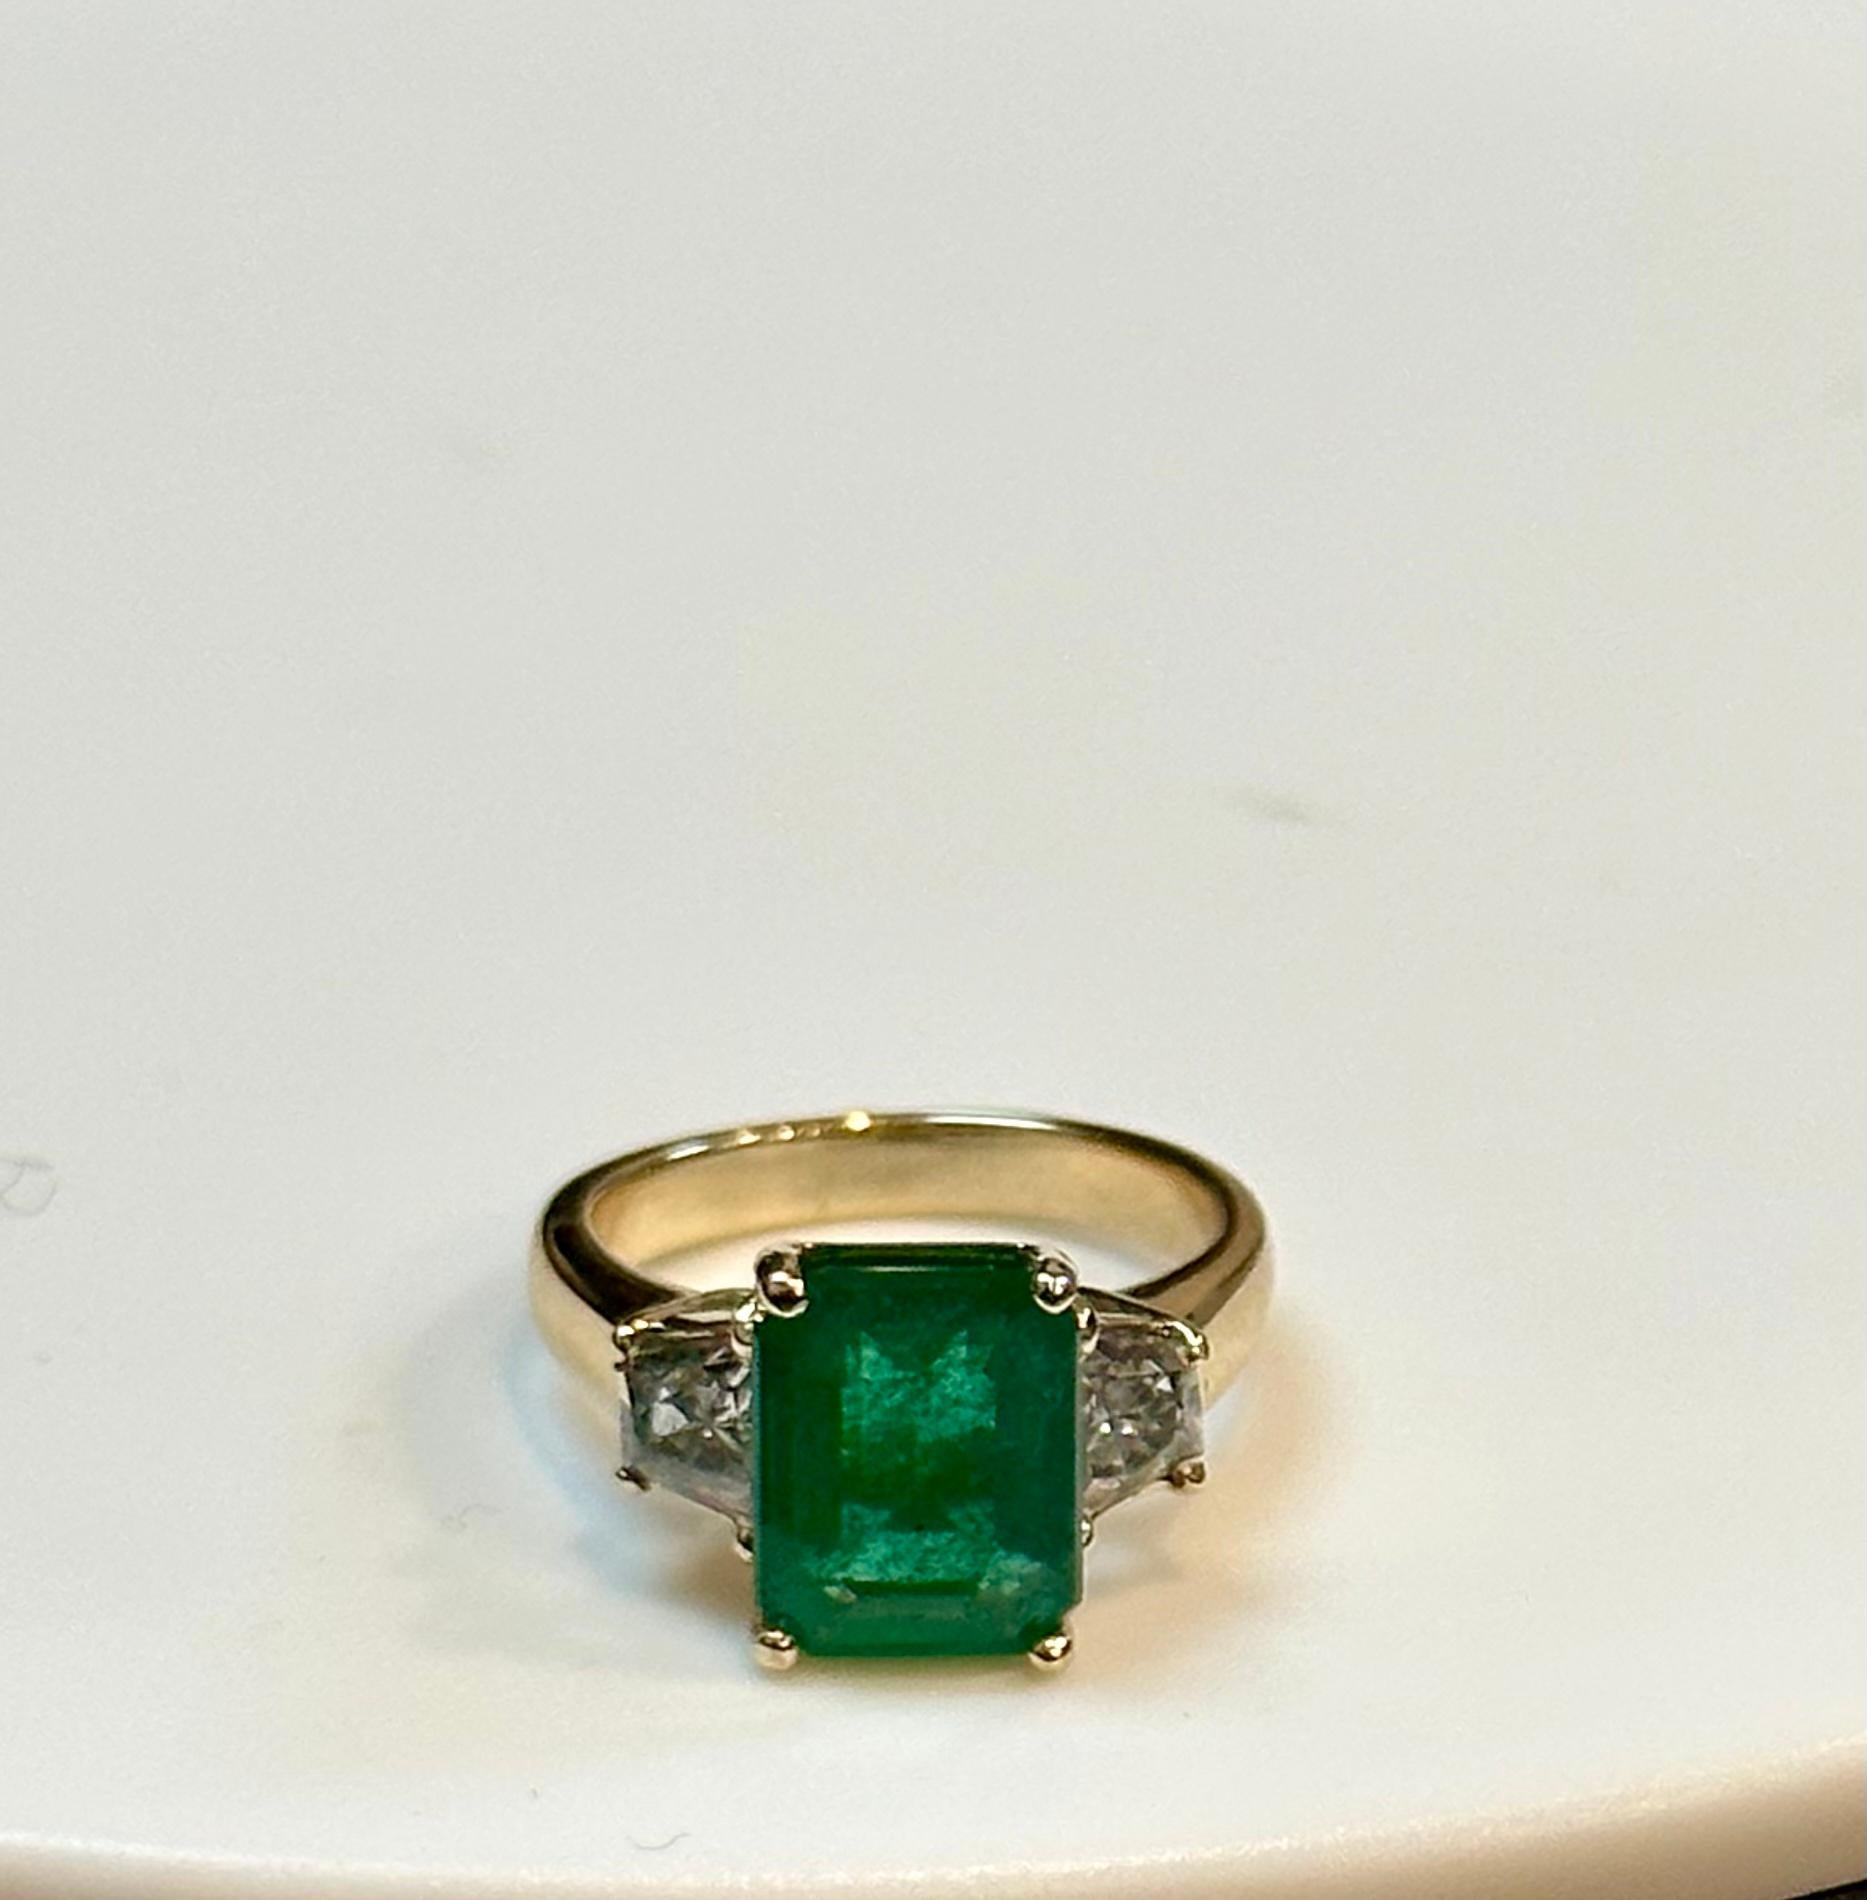 3.5 Ct Emerald Cut Colombian Emerald and 1 Carat Diamond 14 Kt Yellow Gold Ring
Estate piece Natural Emerald 
one  Trapezoid shape Diamonds on either side of the Emerald. 
14 K White gold 5.2 Gm
2 Diamonds: approximate 1 Ct Total weight 
 0.5 ct